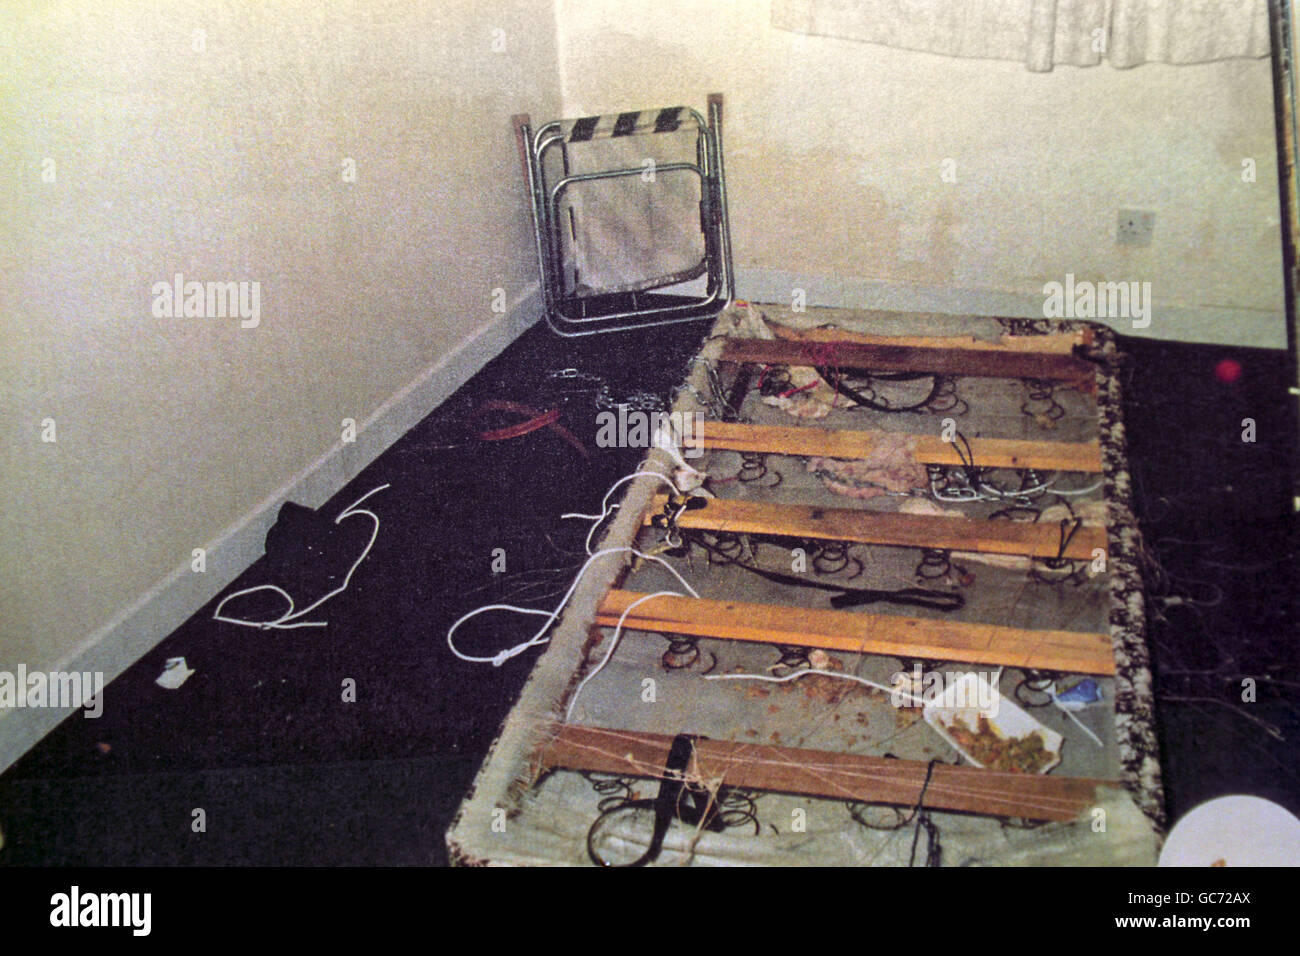 THE REMAINS OF A CHIP TAKEAWAY LIE ON THE UPTURNED BED ON WHICH SUZANNE CAPPER WAS ALLEGEDLY HELD CAPTIVE, BEFORE BEING TORTURED AND MURDERED. NOT BE PUBLISHED UNTIL SENTENCES ARE PASSED. Stock Photo